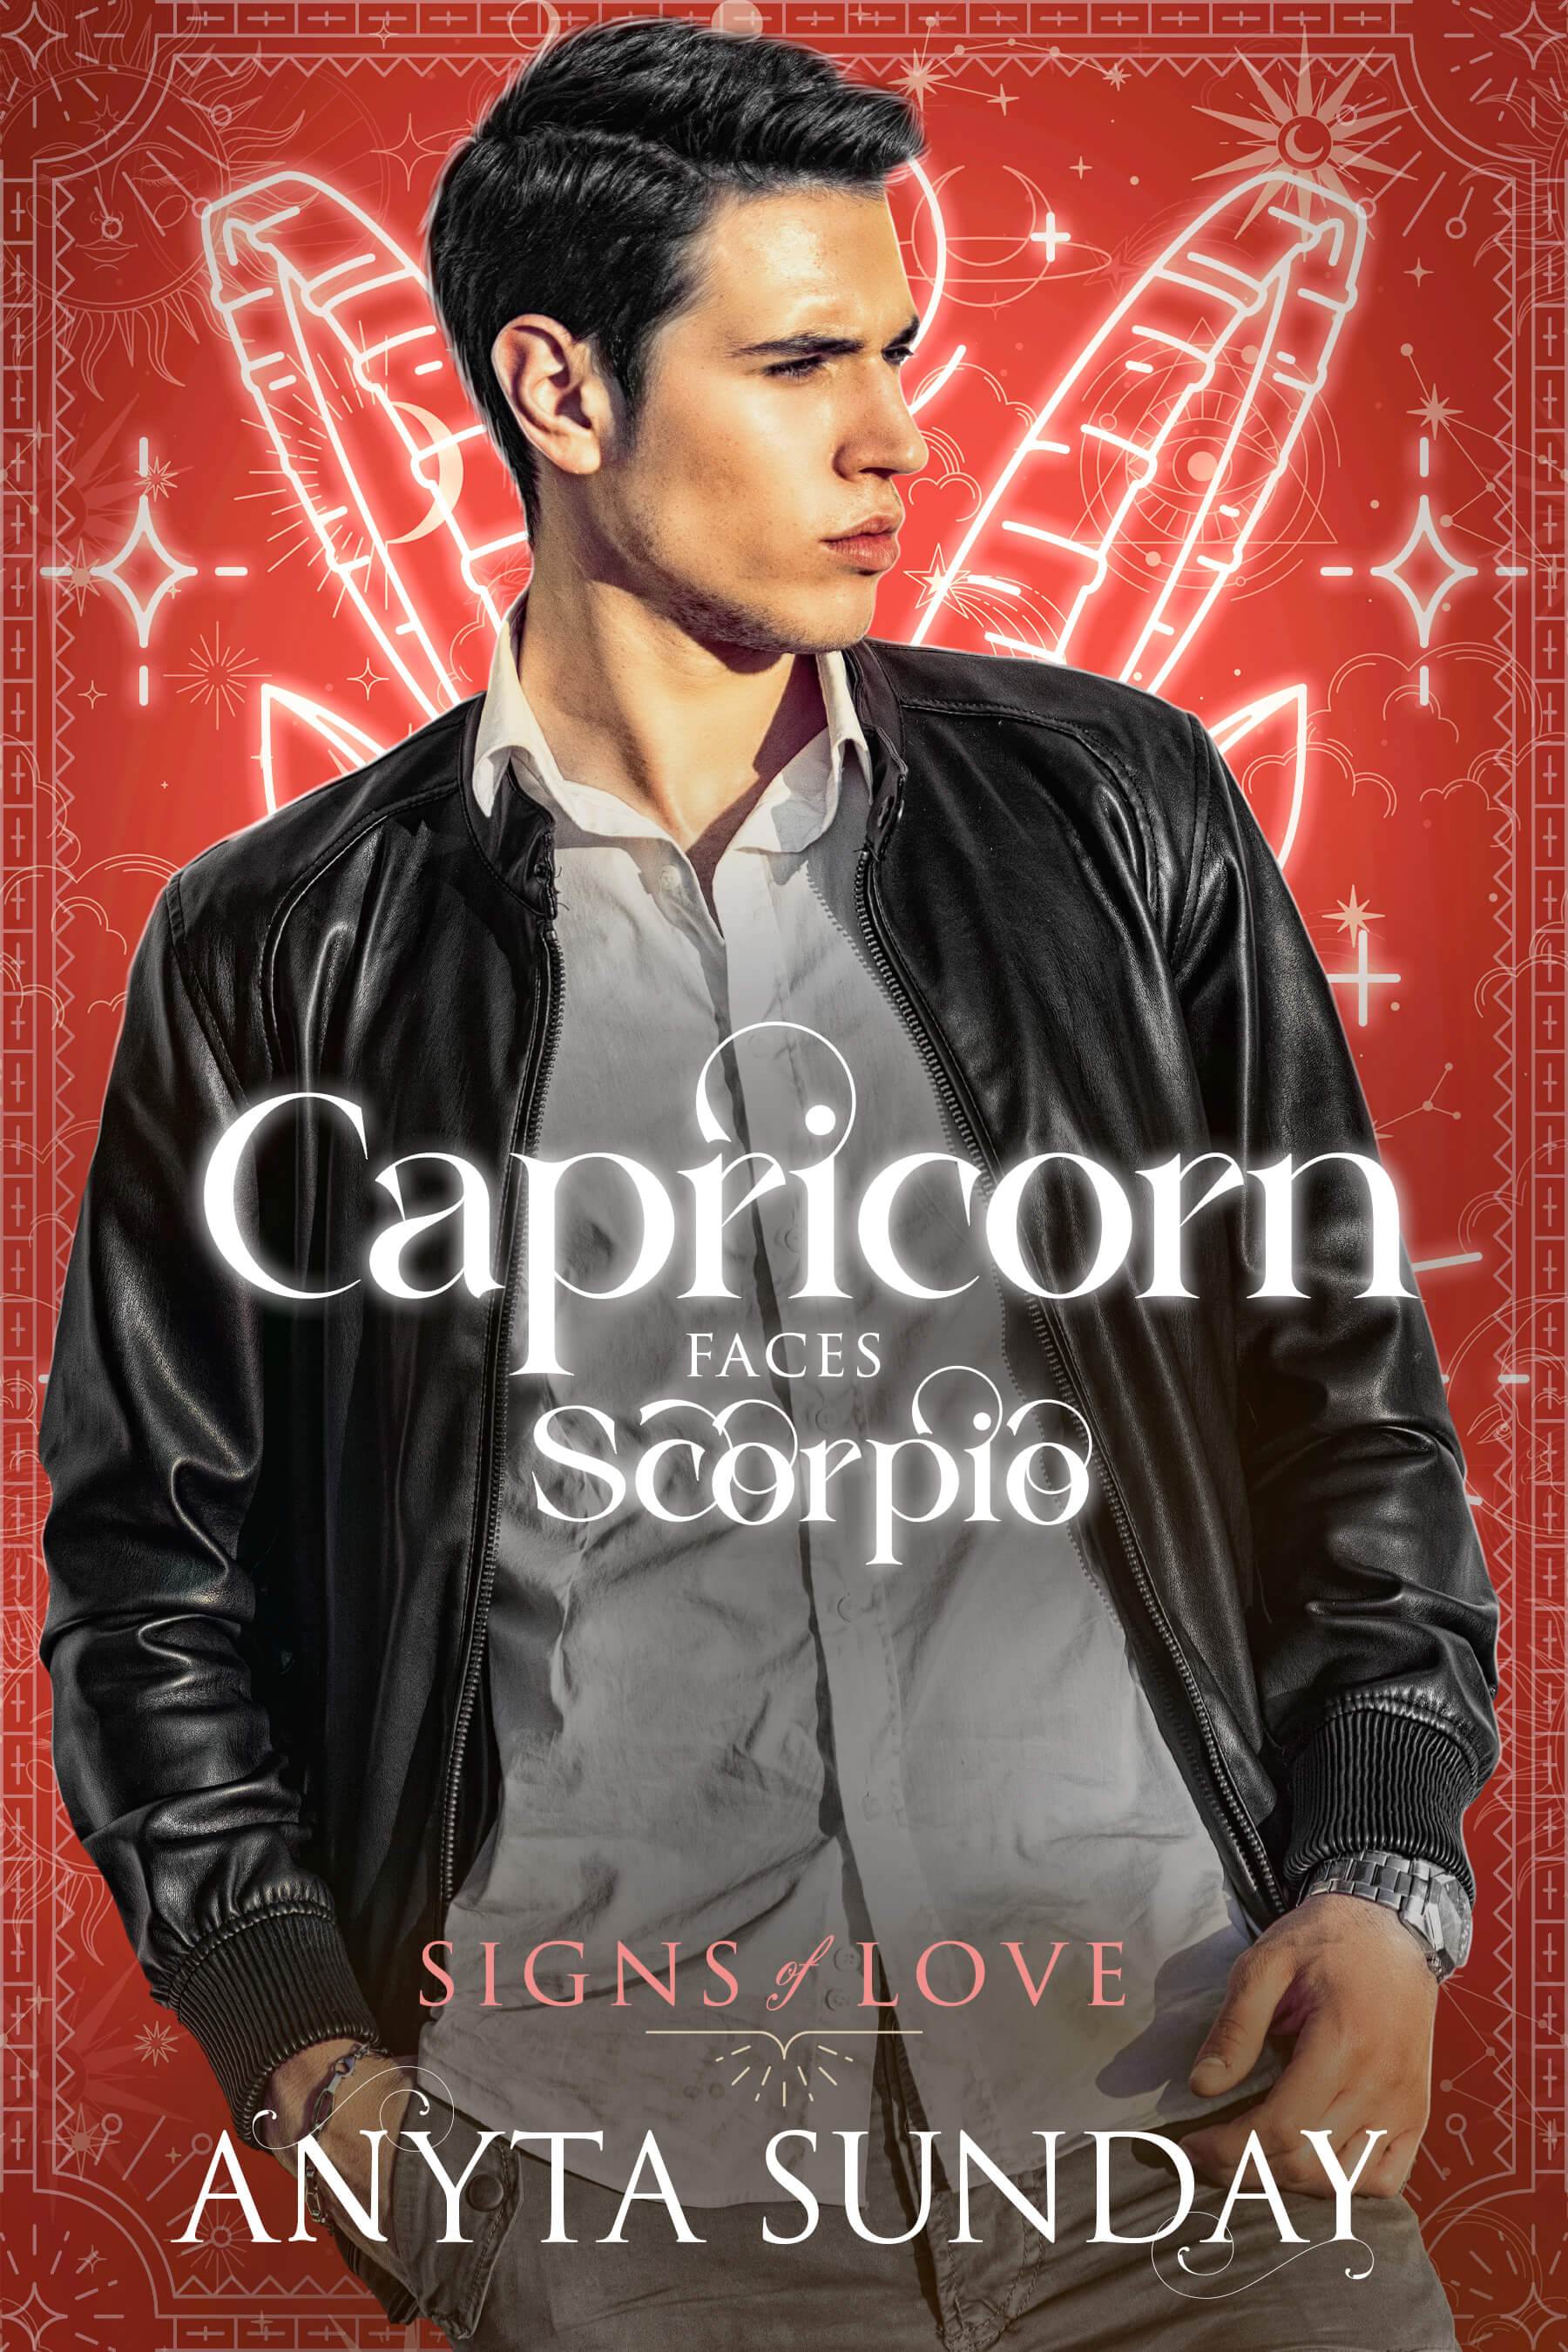 Capricorn Faces Scorpio is book 7 in the slow-burn, gay rom-com series "Signs of Love"